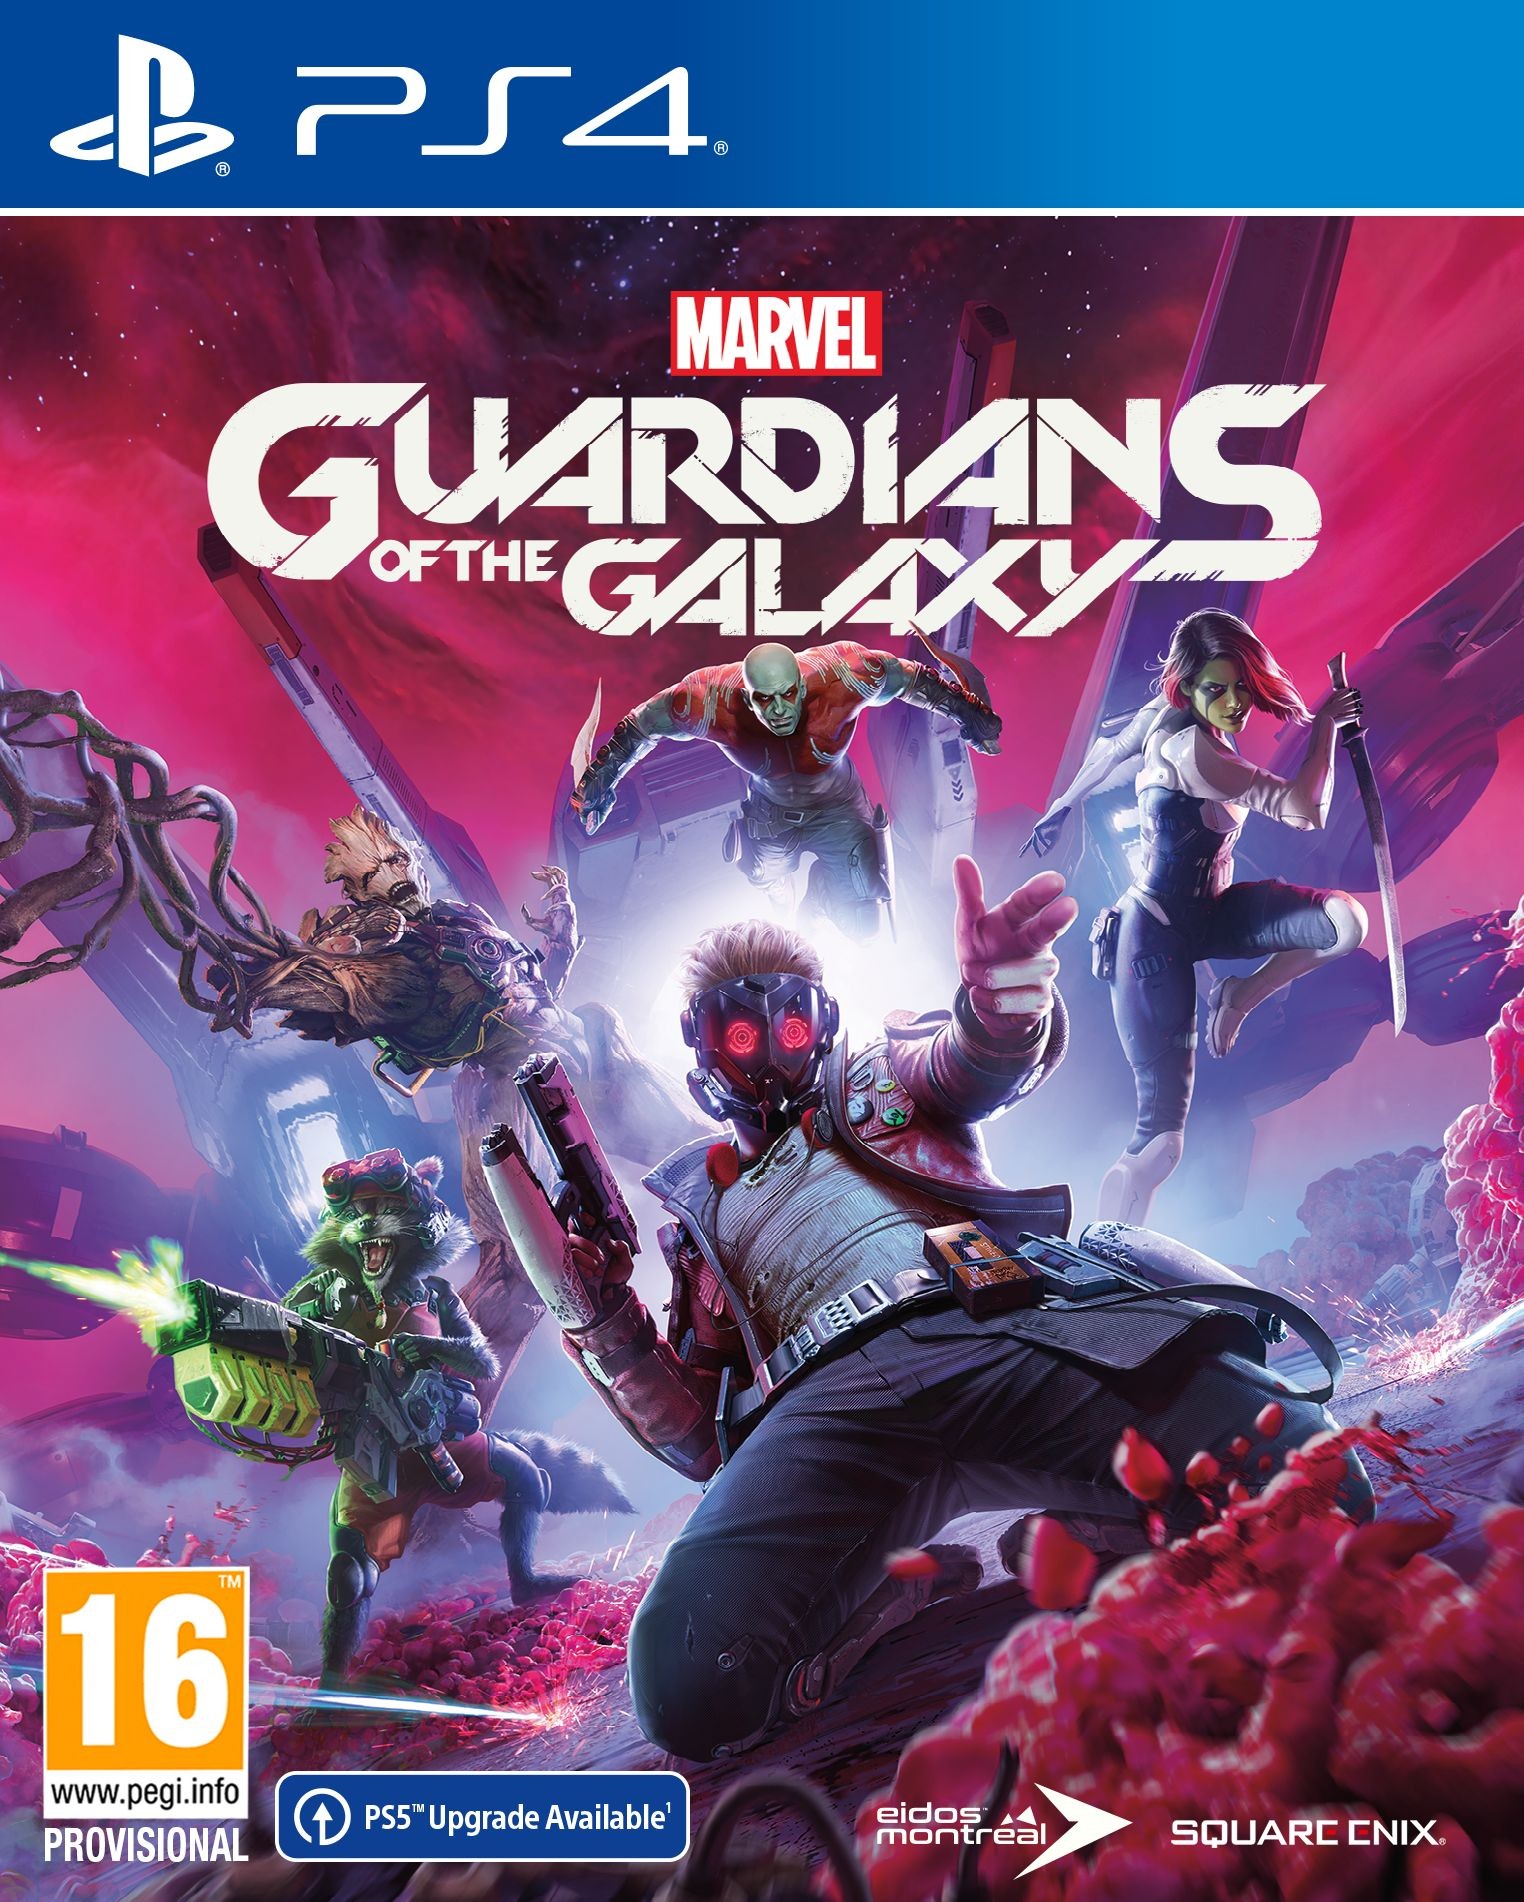 Marvels Guardians of the Galaxy [PS4] 5.05 / 6.72 / 7.02 / 7.55 / 9.00 [EUR] (2021) [Русский] (v1.05)